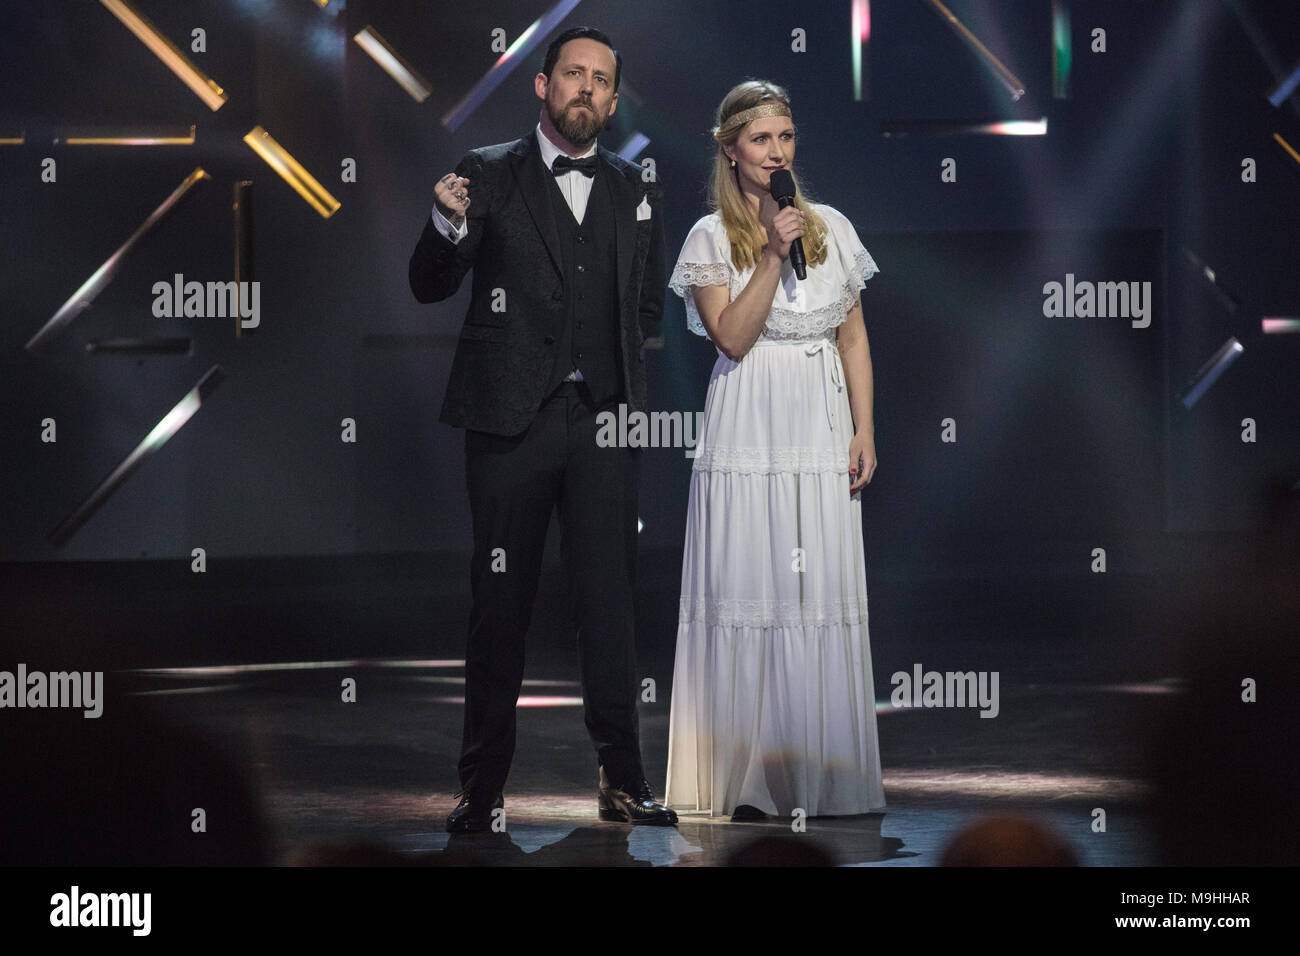 Norway, Oslo - February 25, 2018. The Norwegian musician Tarjei Strøm is hosting the Norwegian Grammy Awards, Spellemannprisen 2017, at Oslo Konserthus in Oslo. Her musician Hedvig Mollestad has joined the stage. (Photo credit: Gonzales Photo - Stian S. Moller). Stock Photo